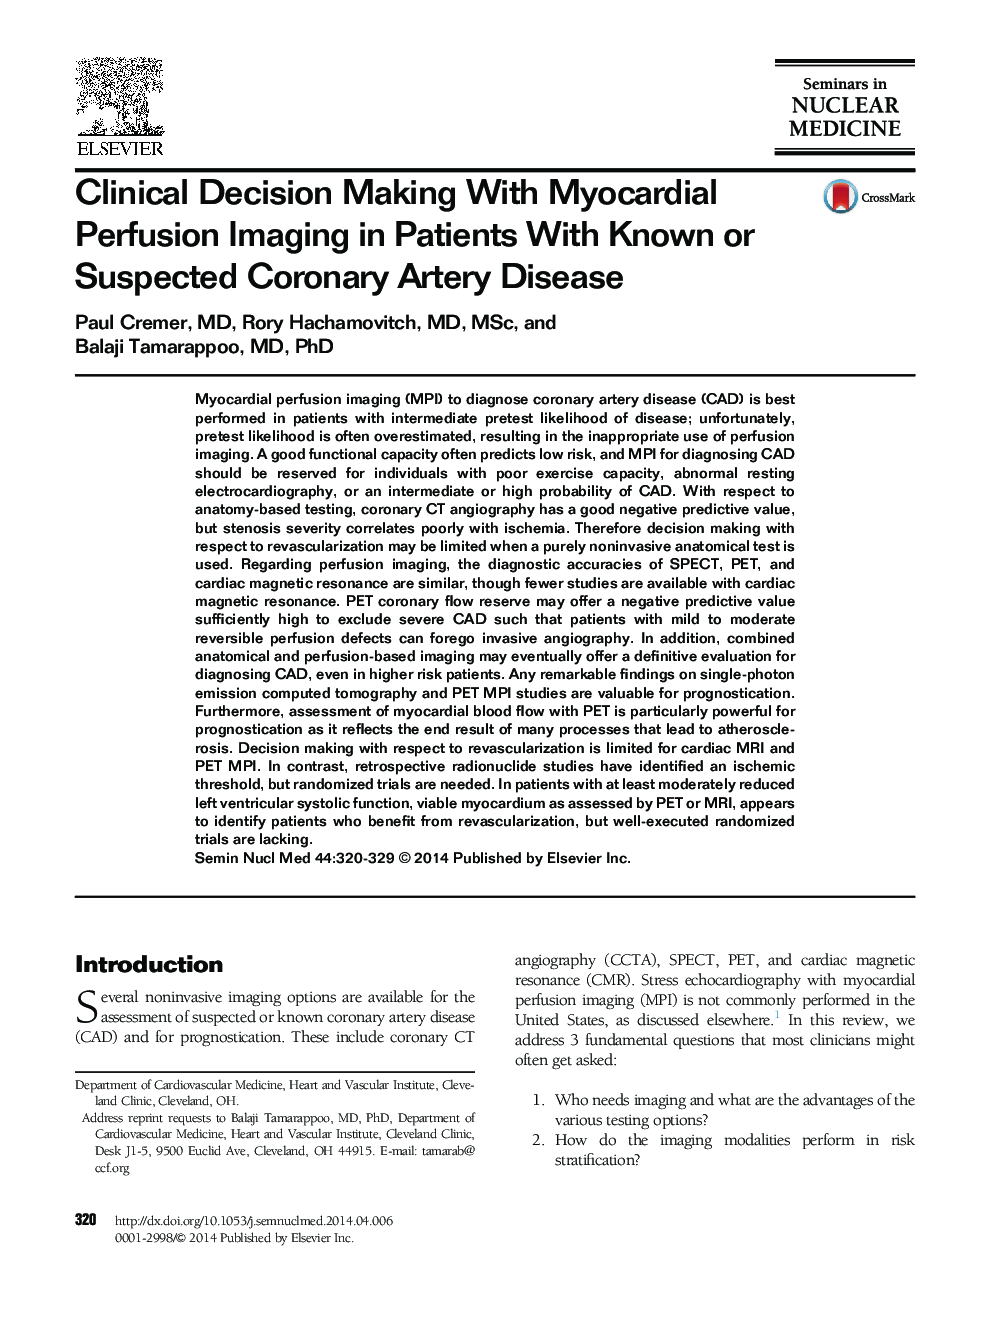 Clinical Decision Making With Myocardial Perfusion Imaging in Patients With Known or Suspected Coronary Artery Disease